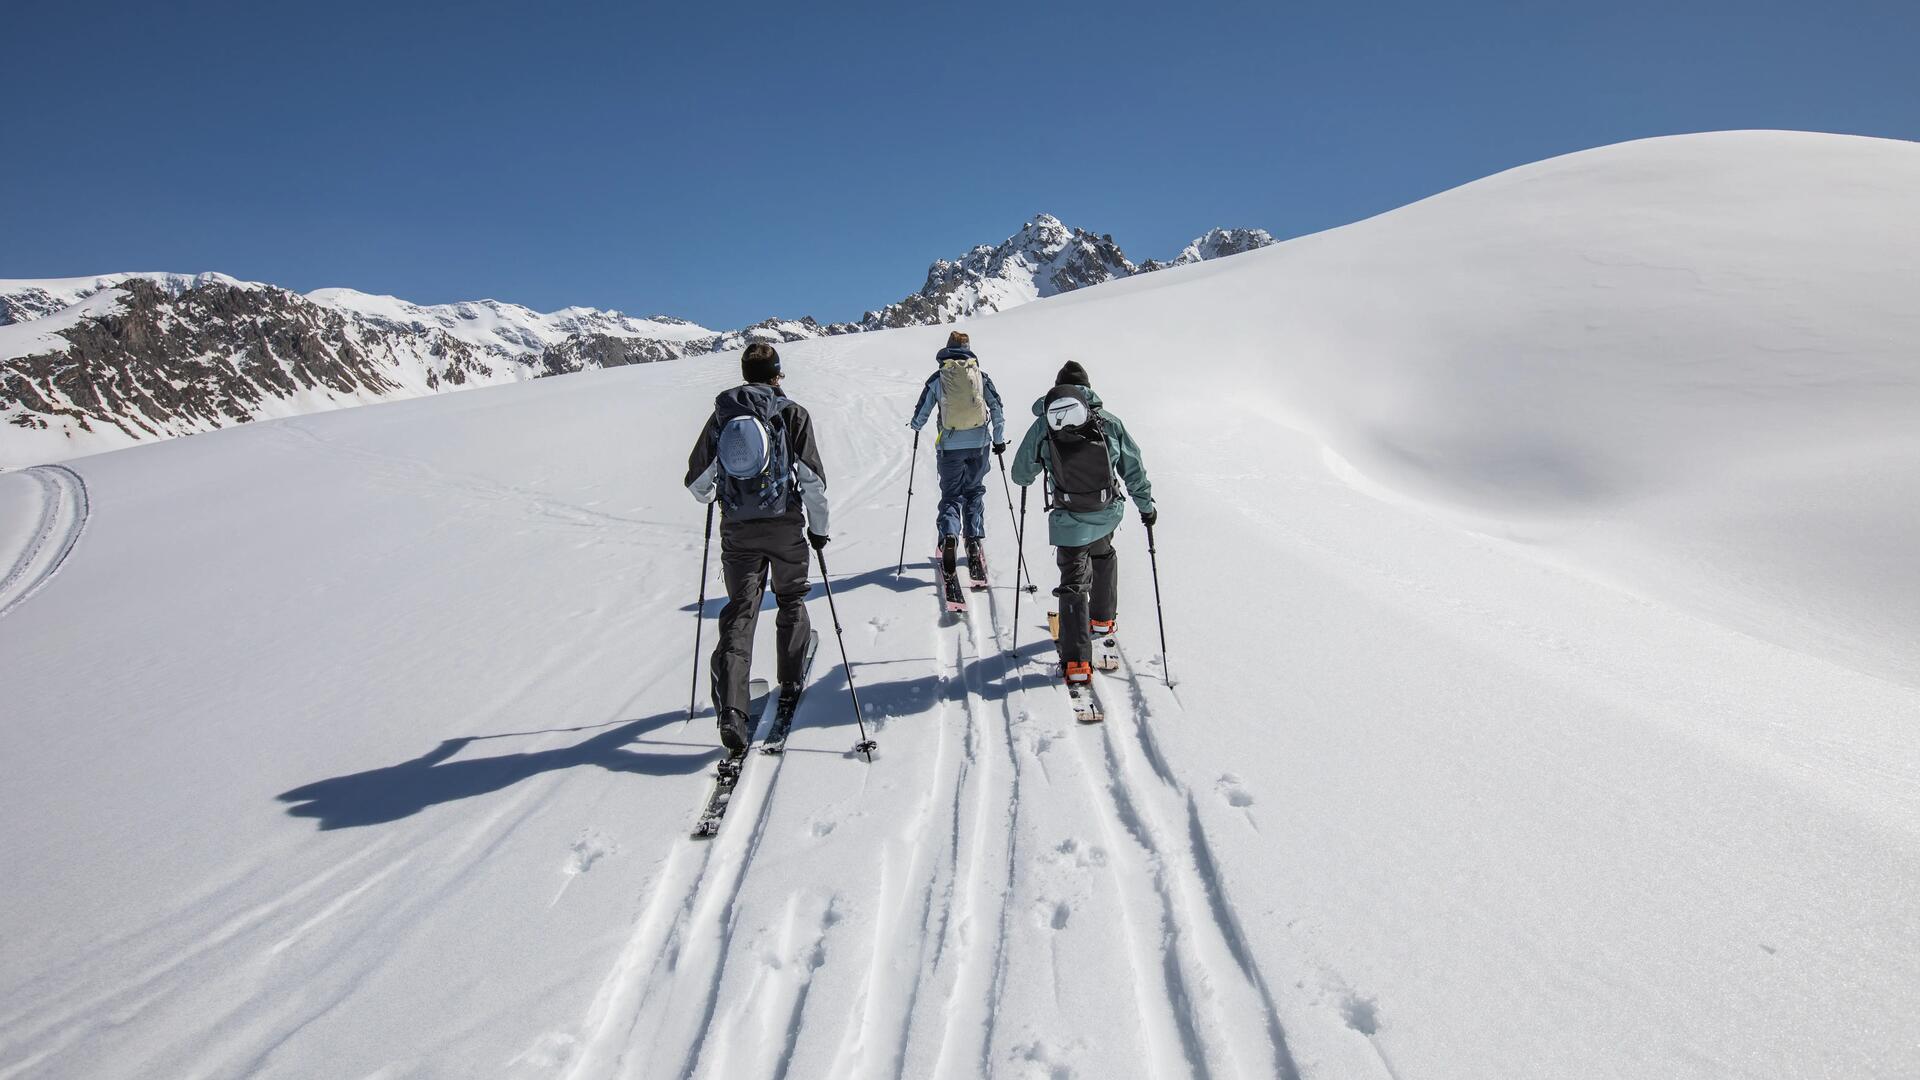 Preparing for an off-piste skiing excursion